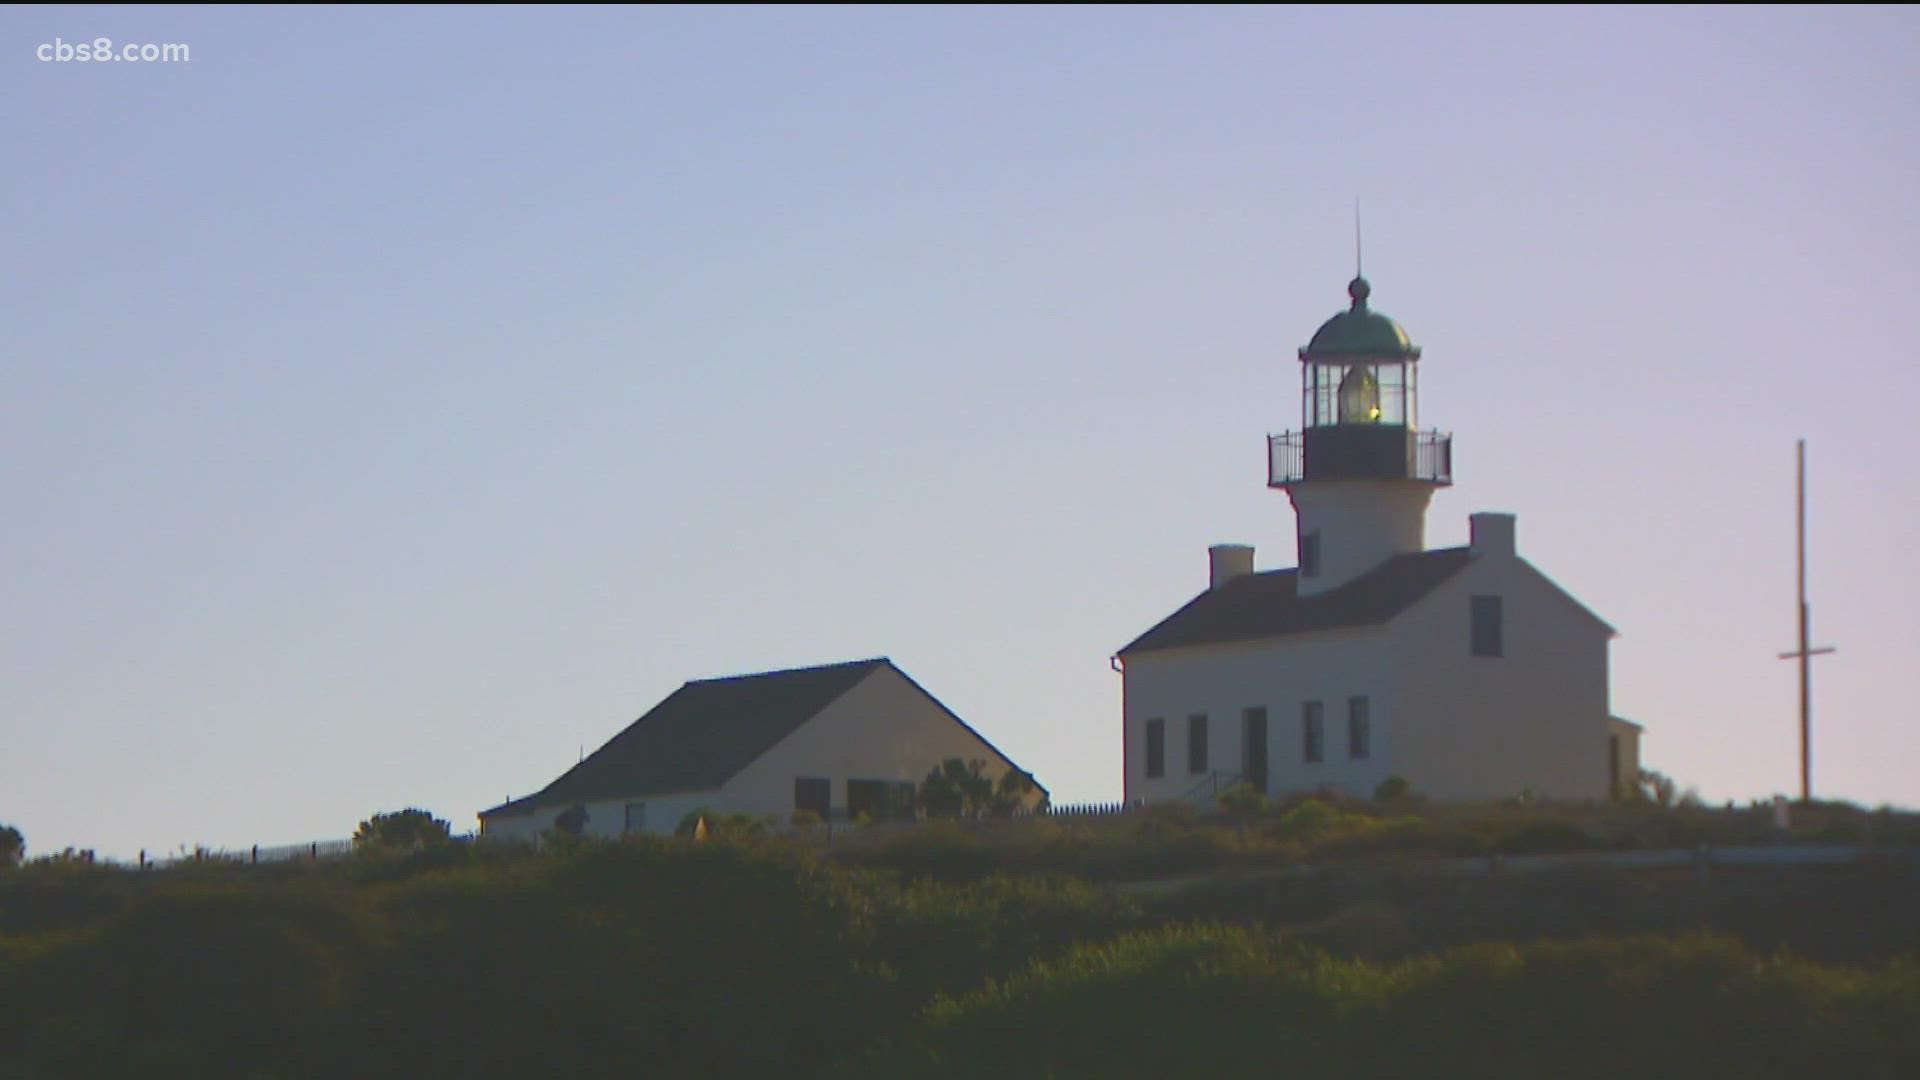 News 8 looks into the history of Point Loma and what it's like today. We revisit the beautiful homes and businesses of the seaside neighborhood featured in 1987.